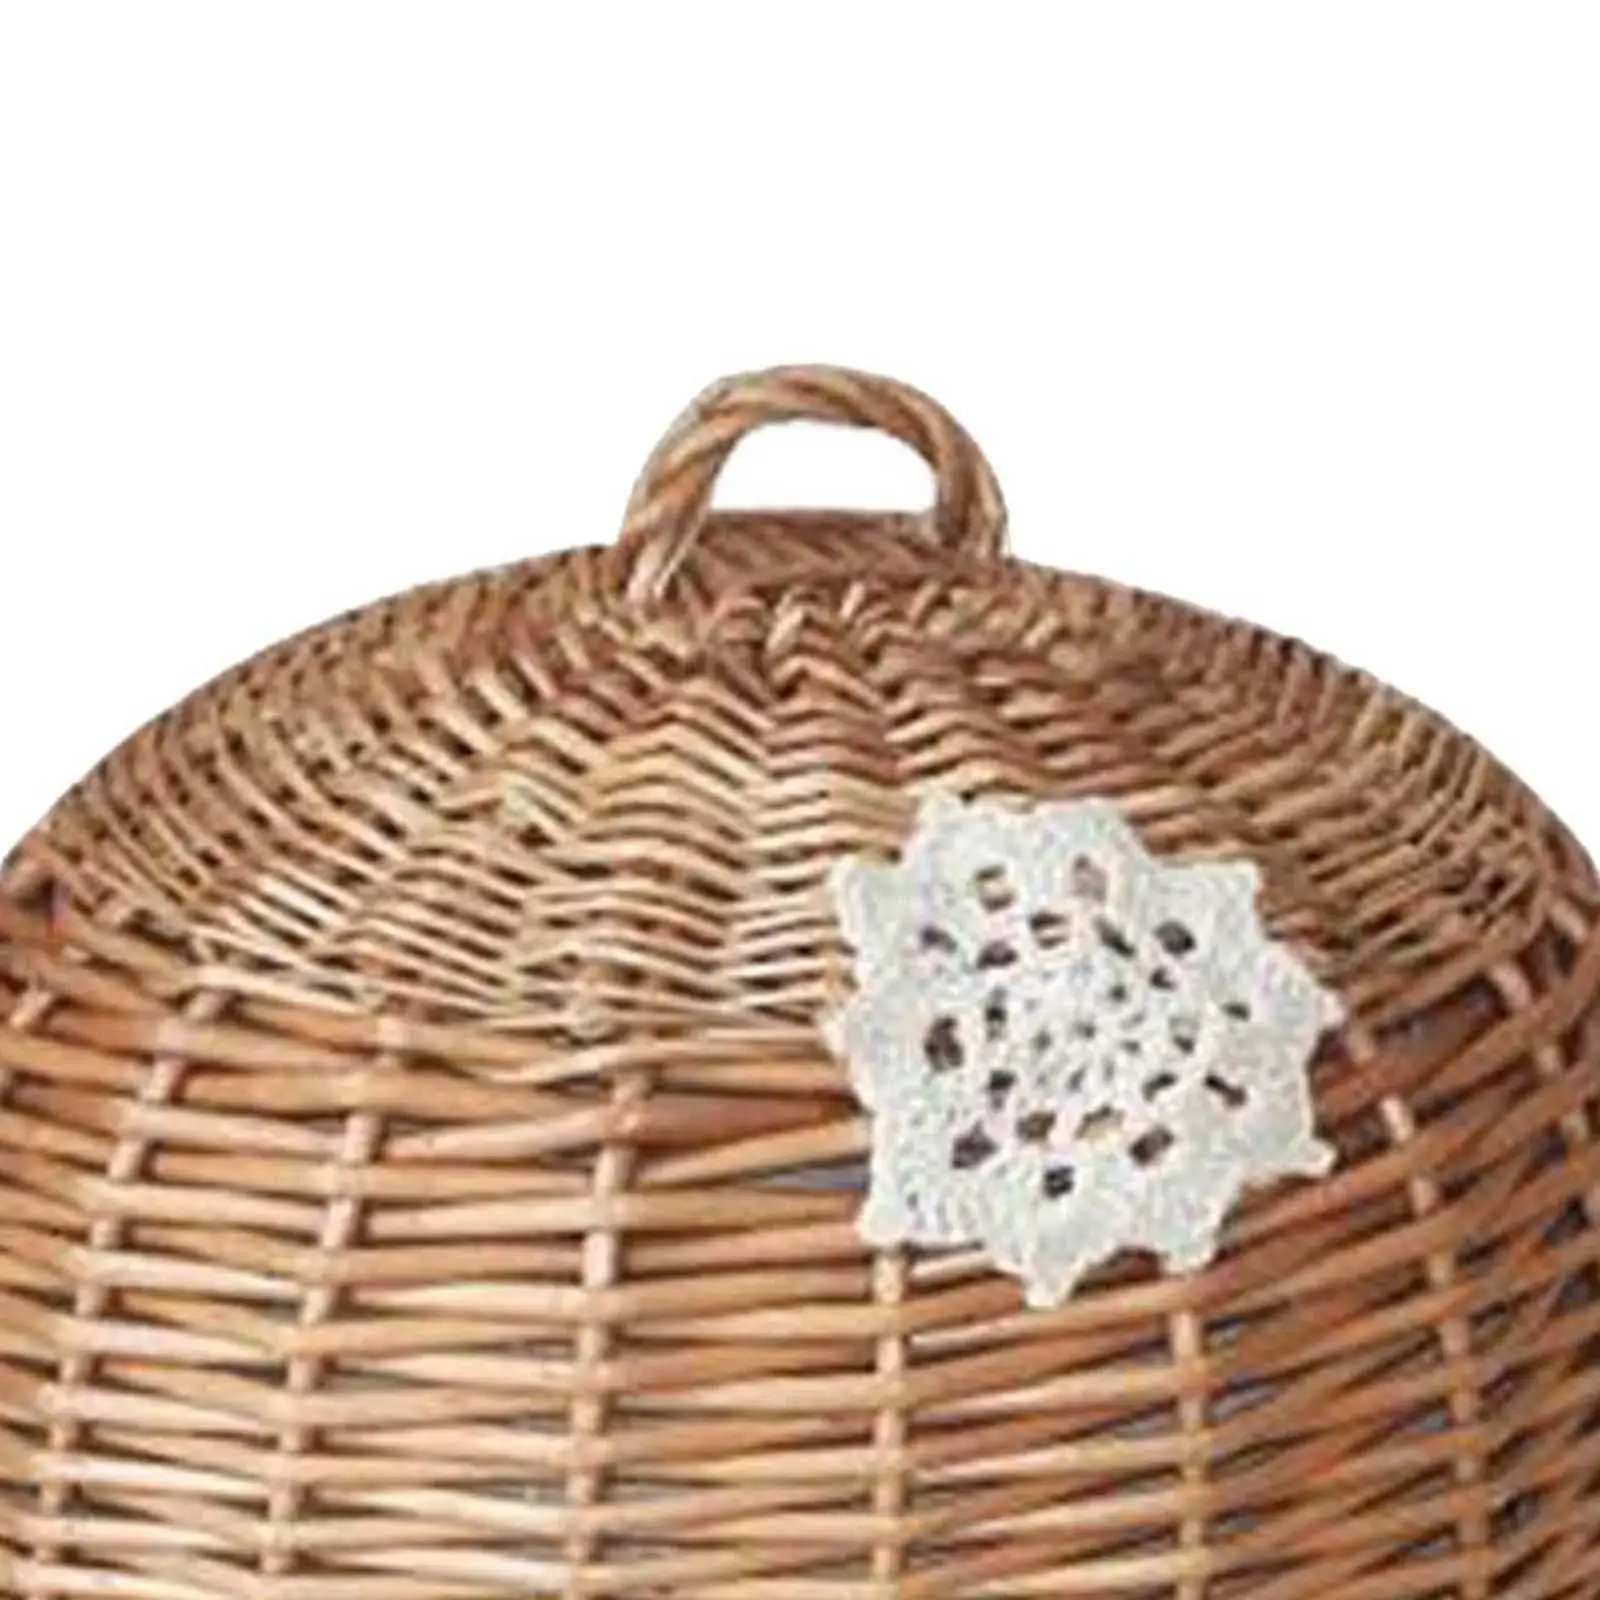 Food Dome Lid and Serving Tray Rattan Wicker Woven Brown Round Lightweight Kitchen Decoration Handcrafted 30CX20cm with Handles